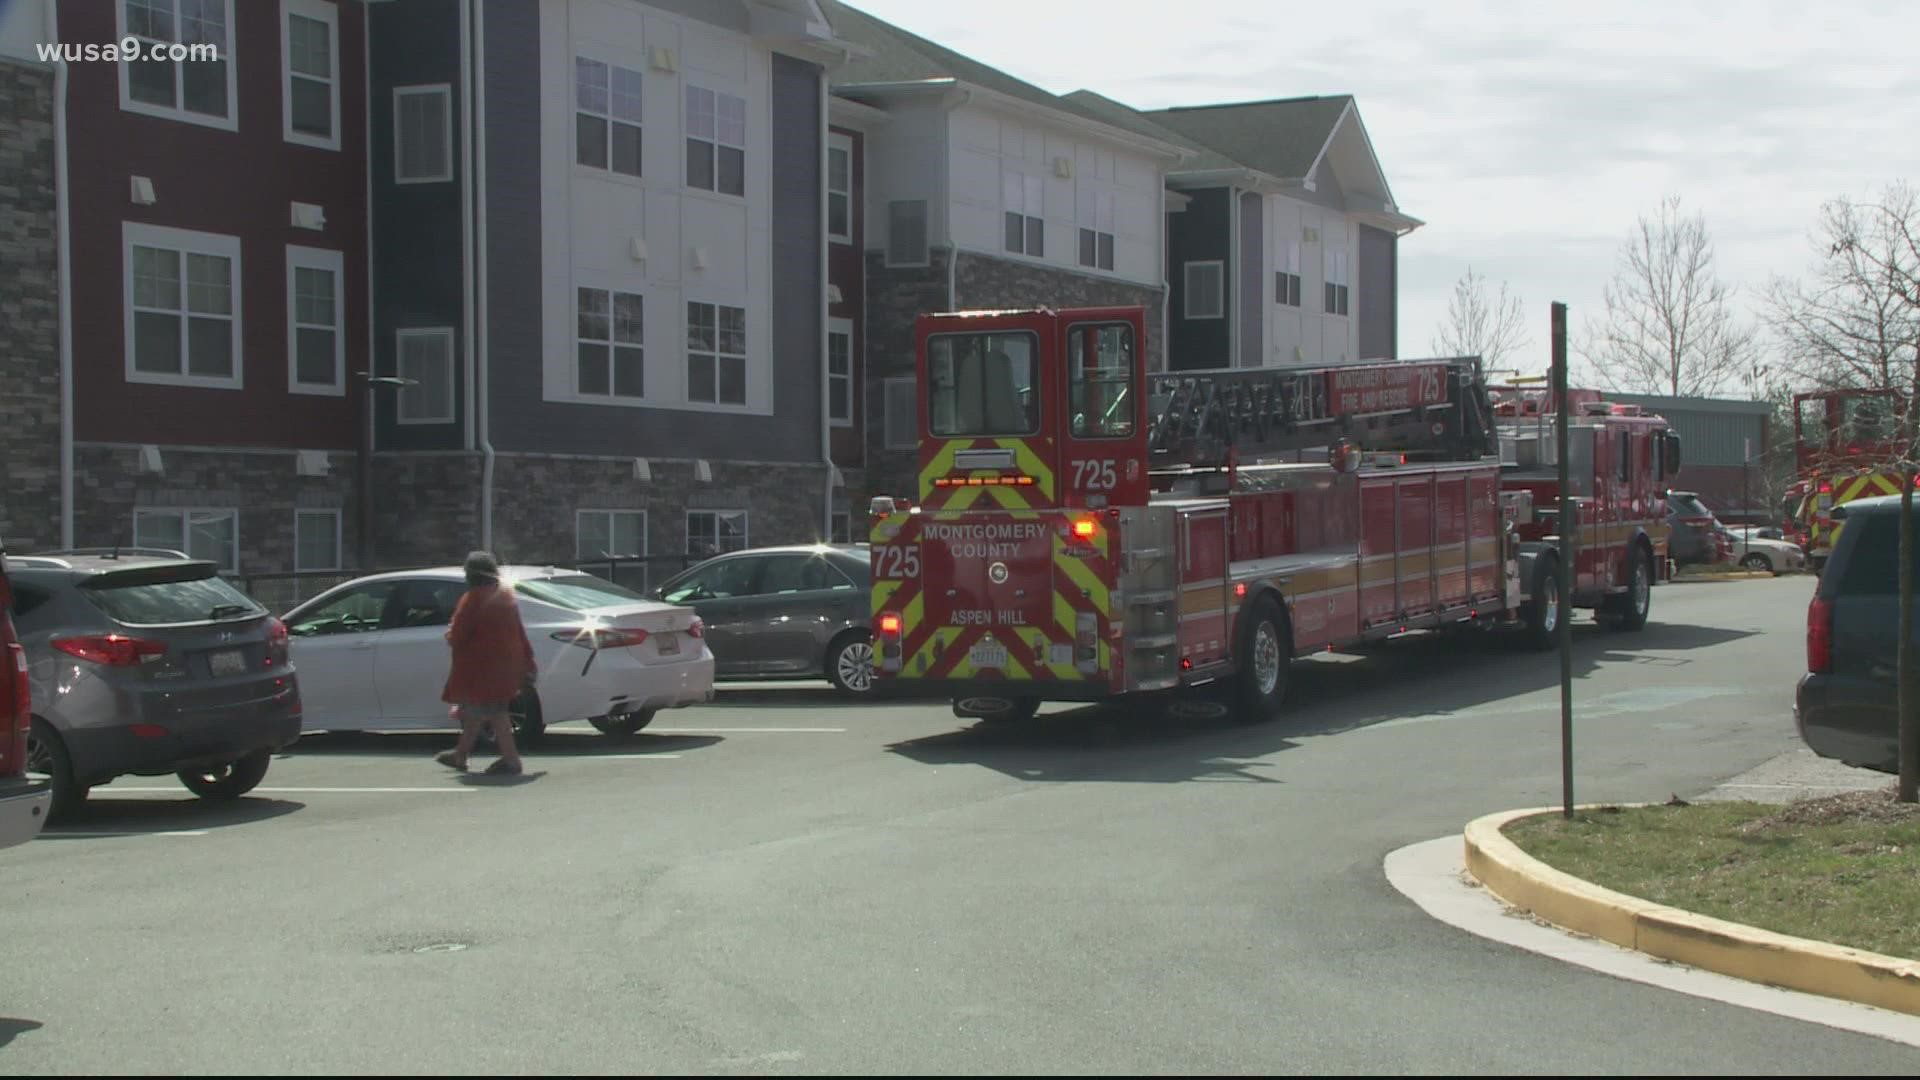 The Montgomery County Fire Department responded to a fire at the Willow Manor at Fairland apartment complex that left several residents displaced.